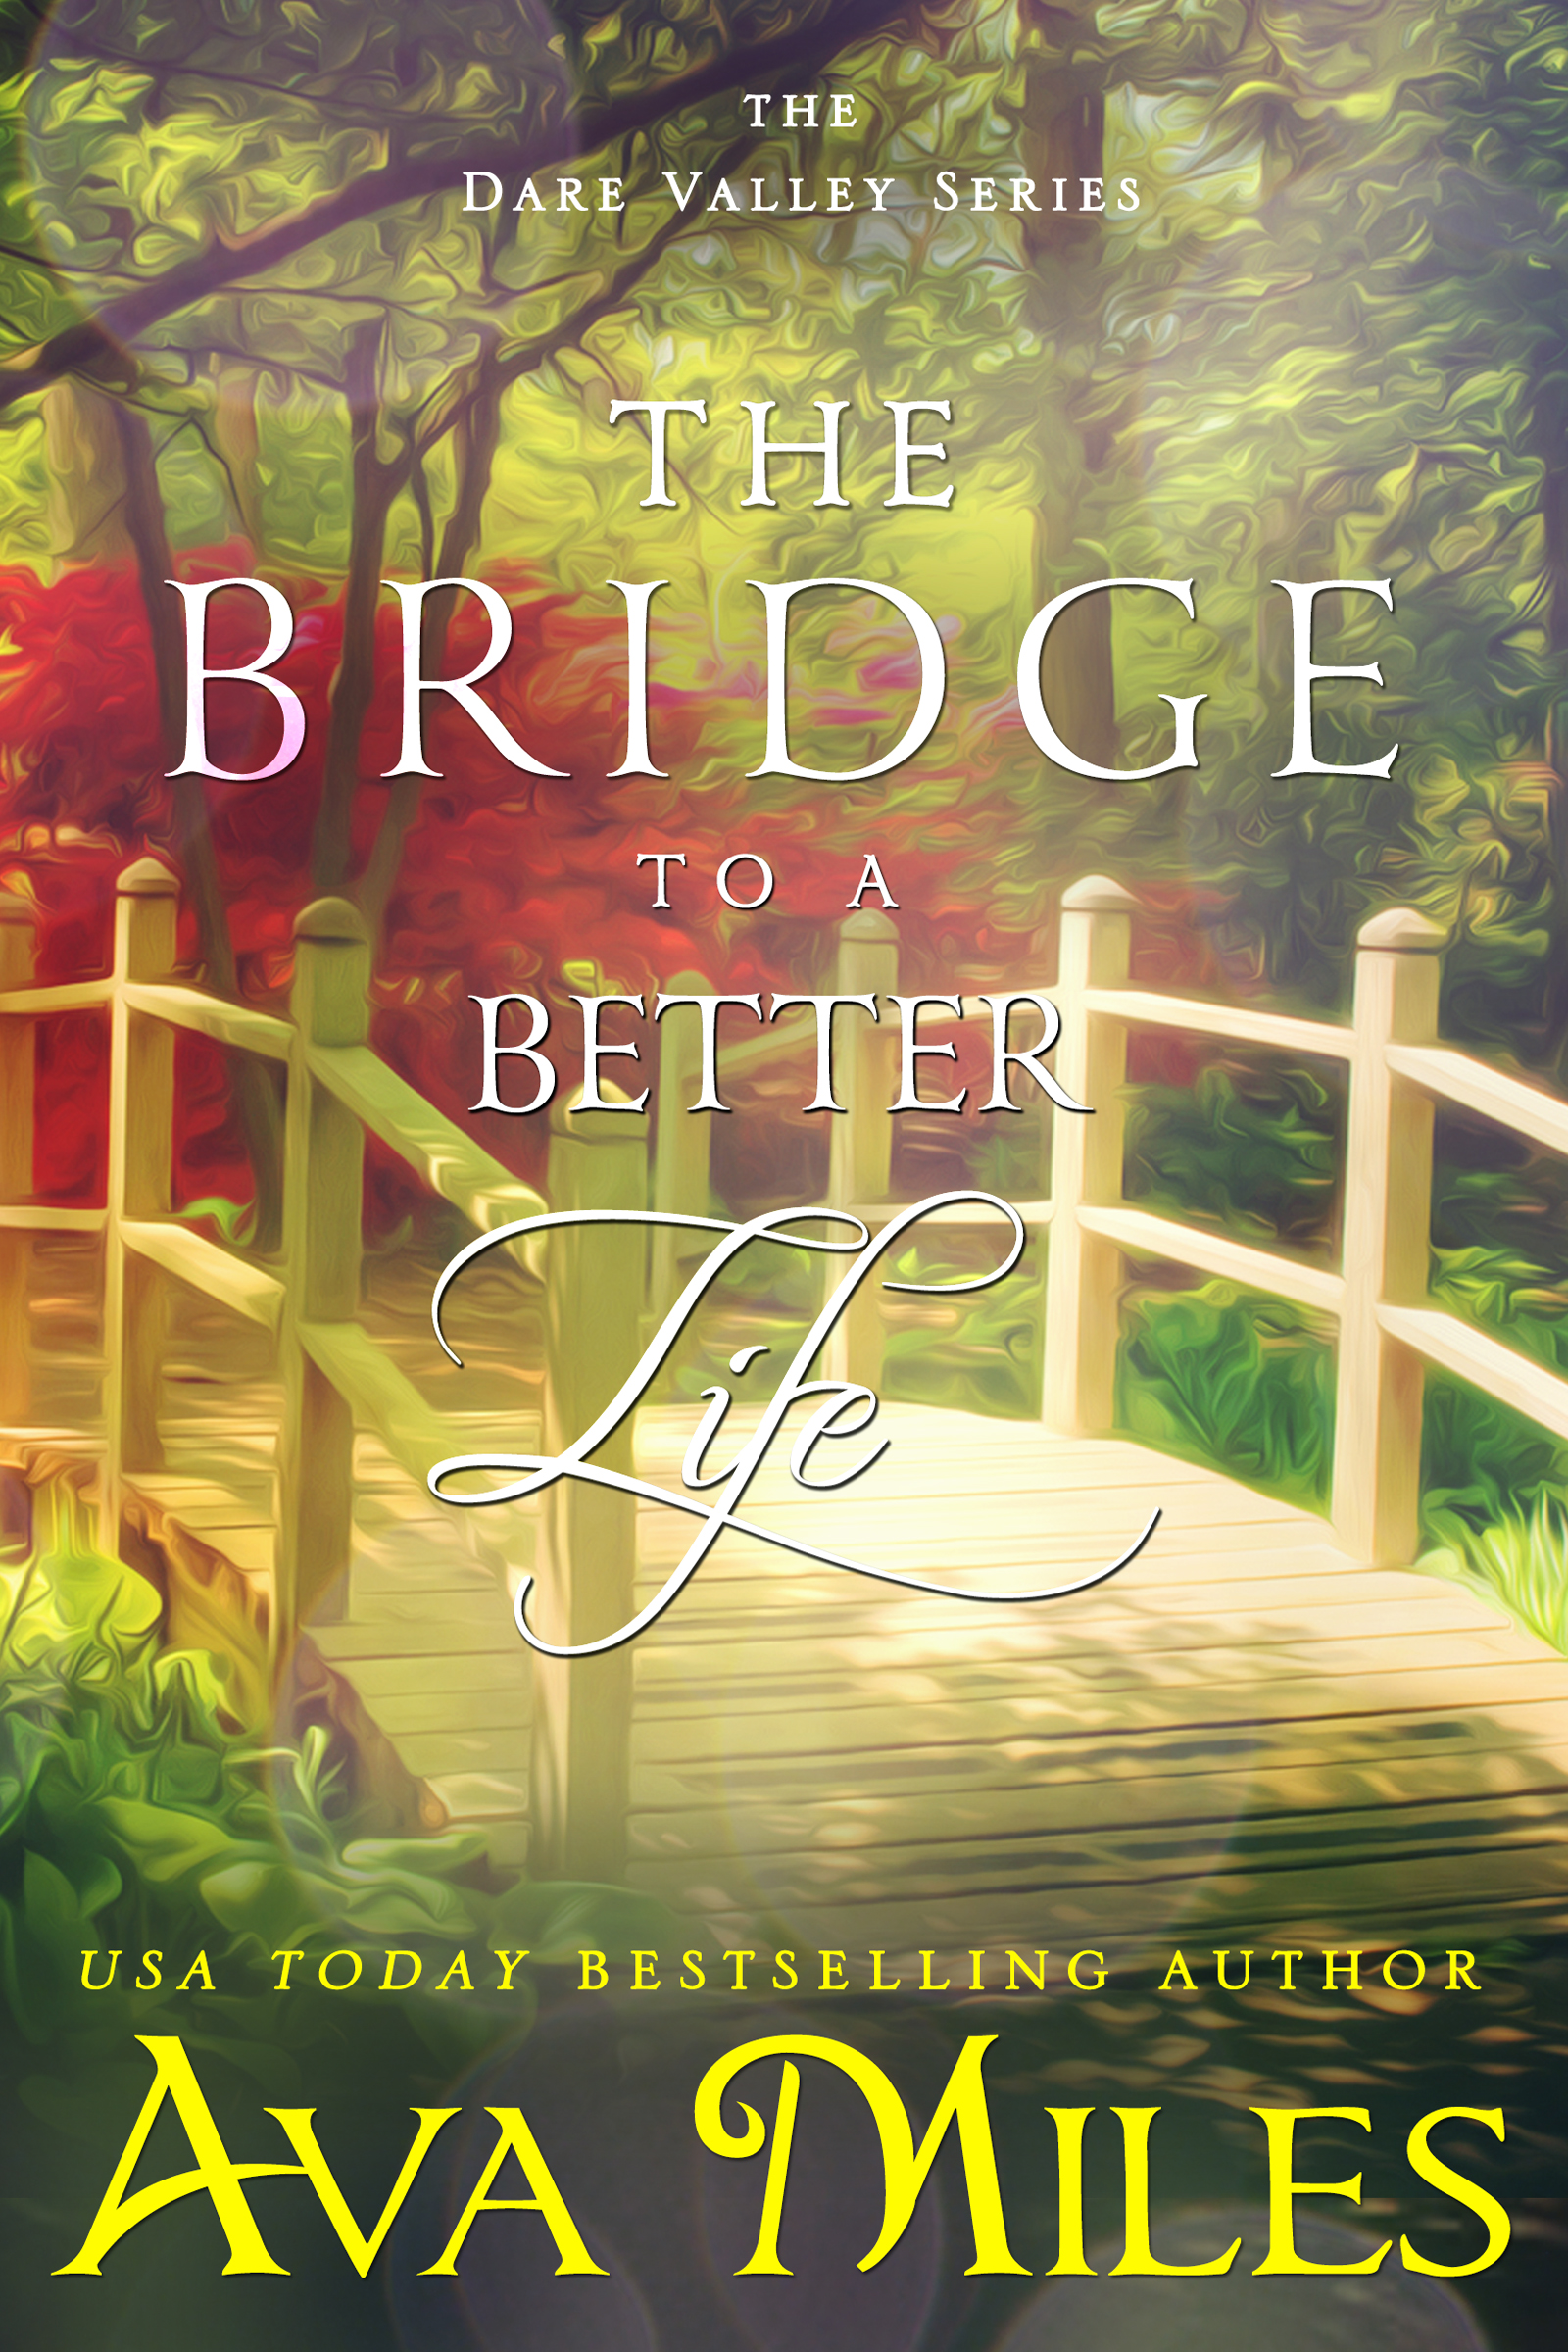 The Bridge to a Better Life (2015) by Ava Miles